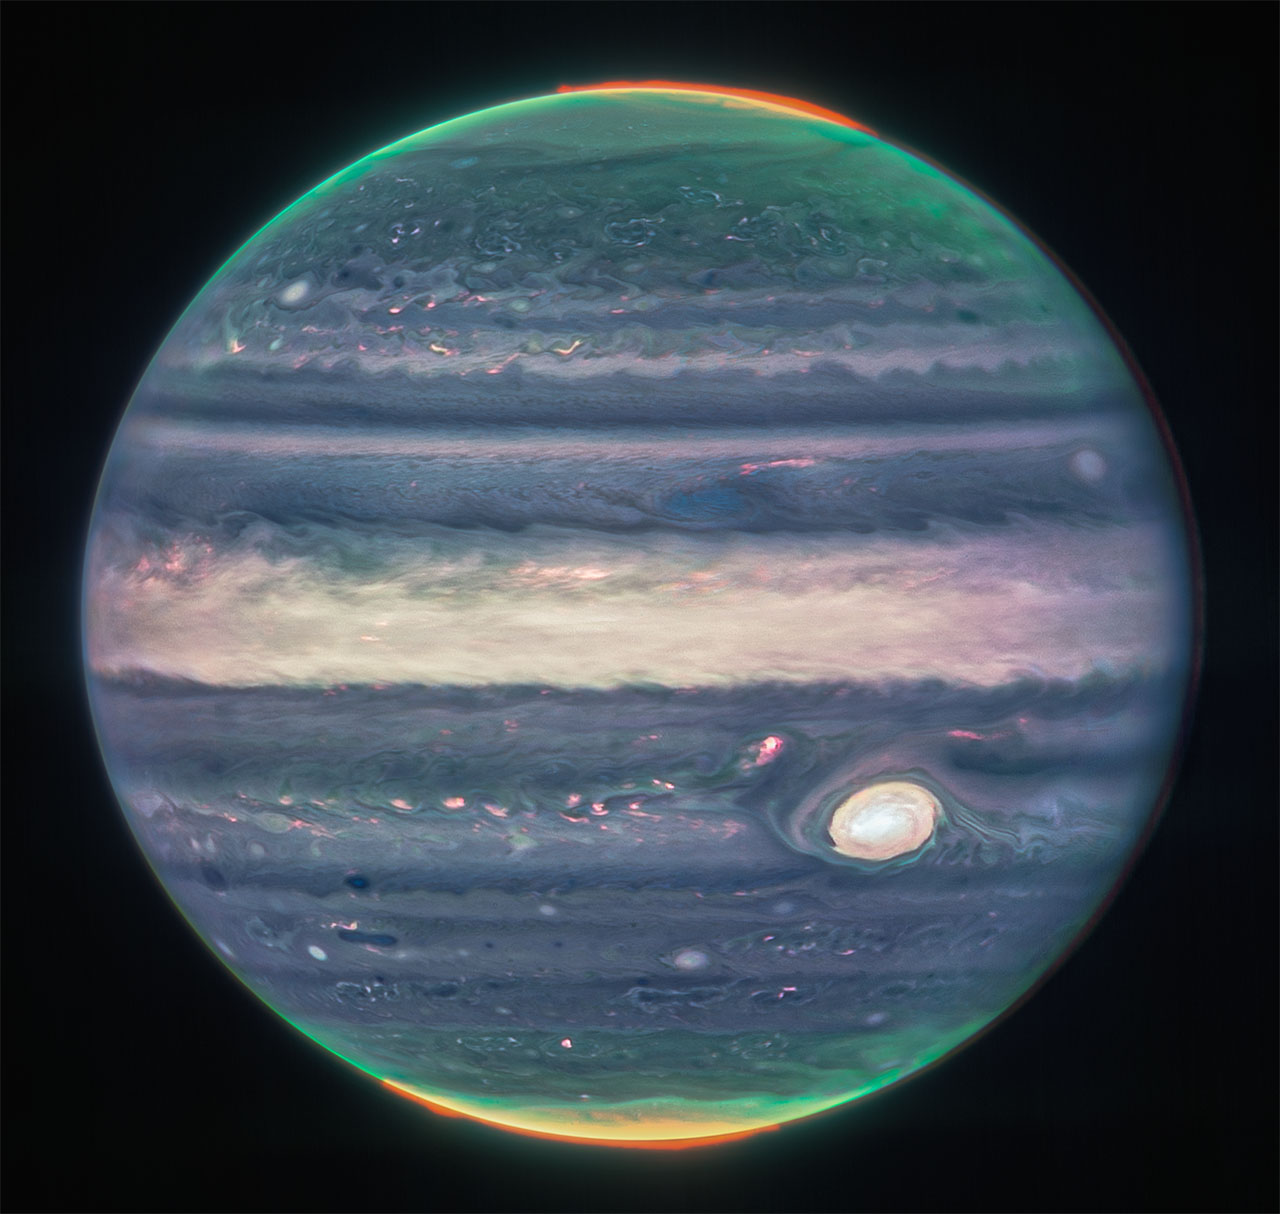 Sharp image of Jupiter in shades of blue with glowing yellow and red poles and a green haze.